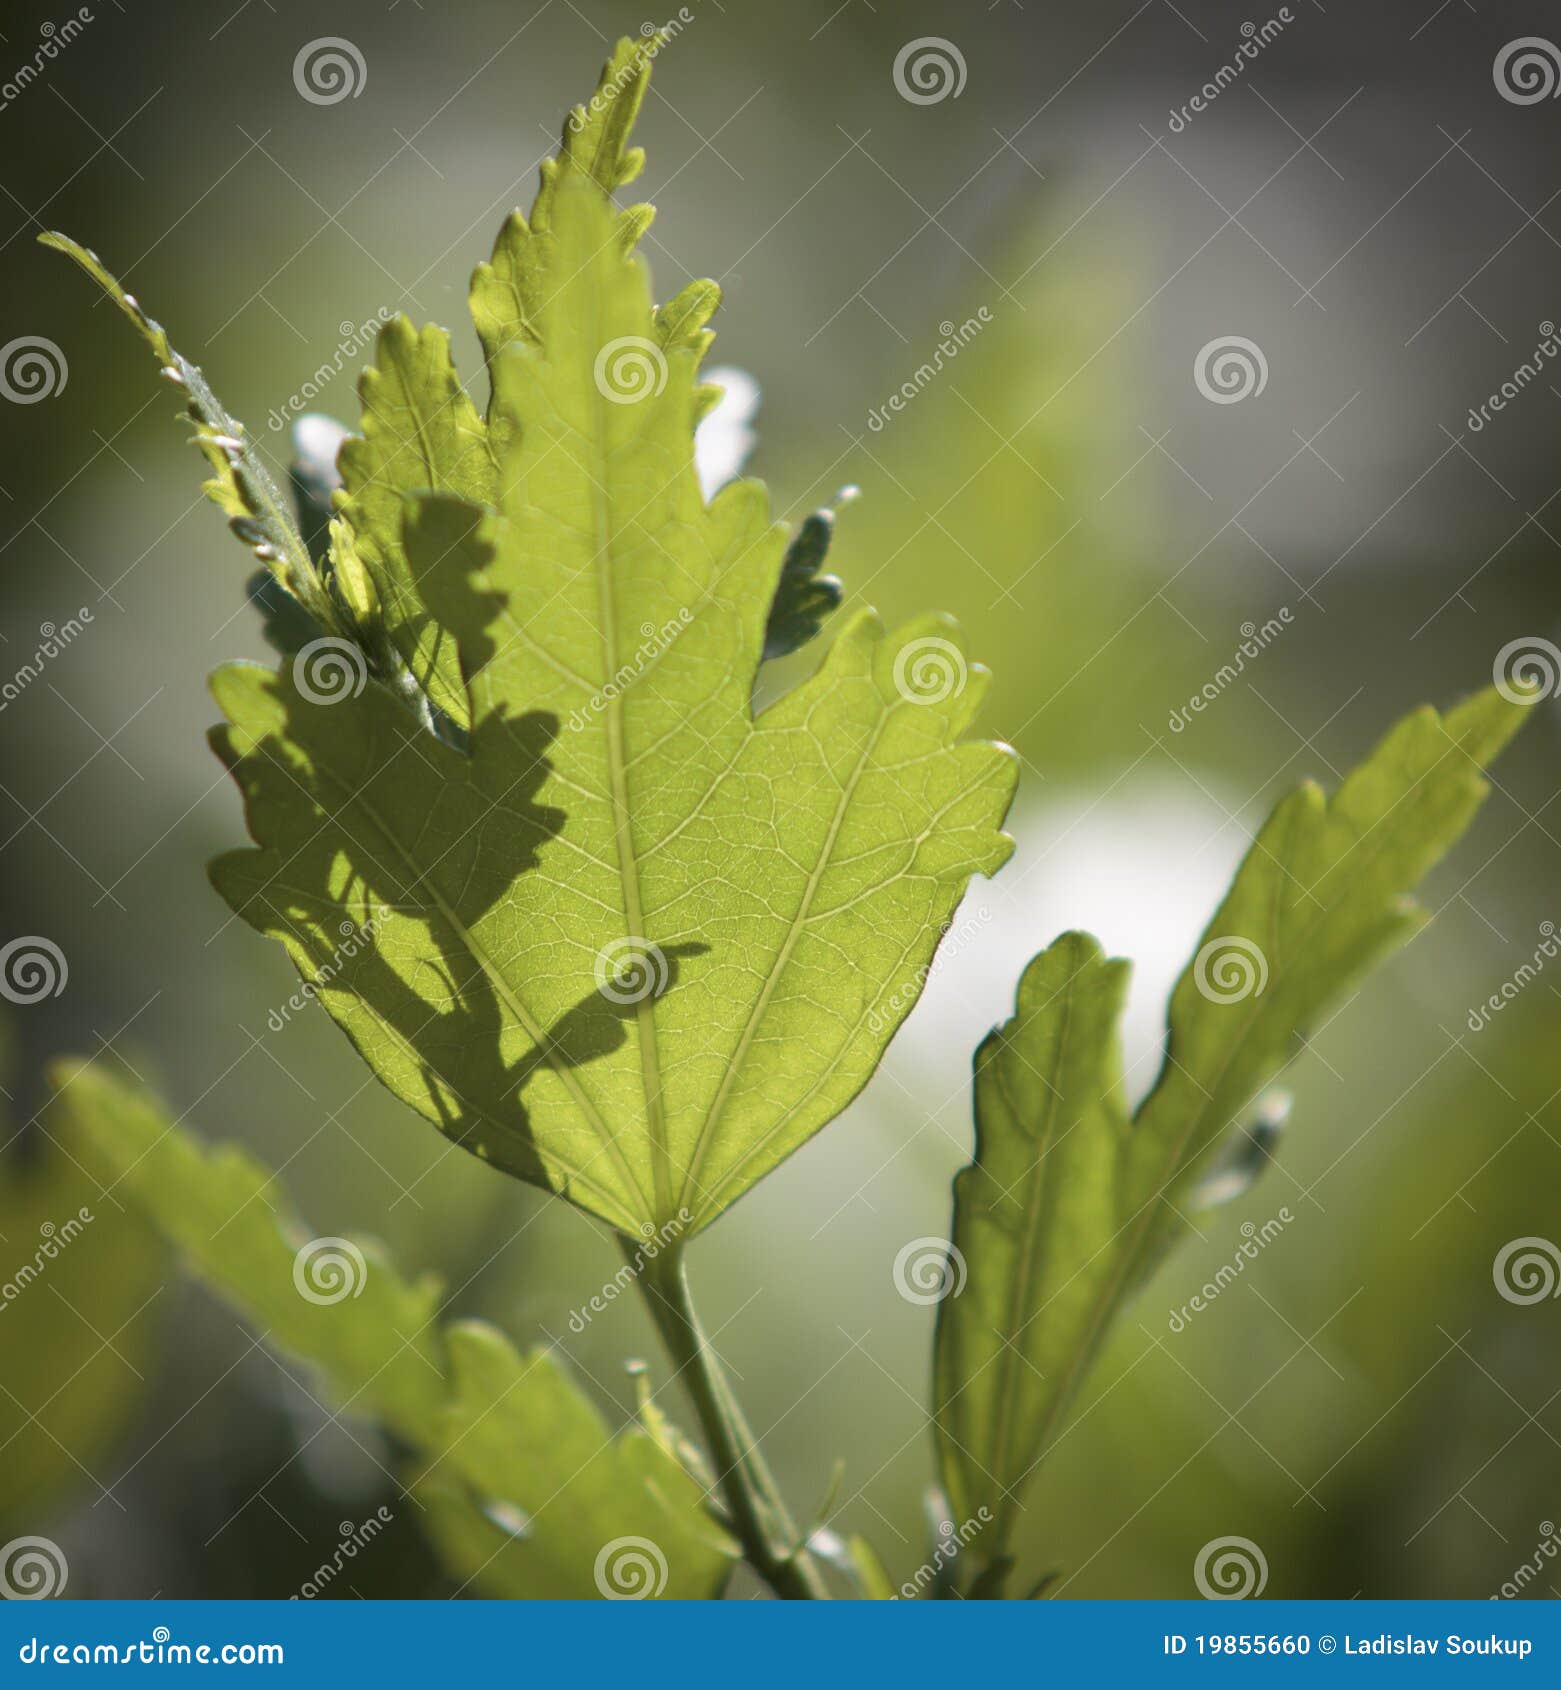 Macro view of green leaves of plant.